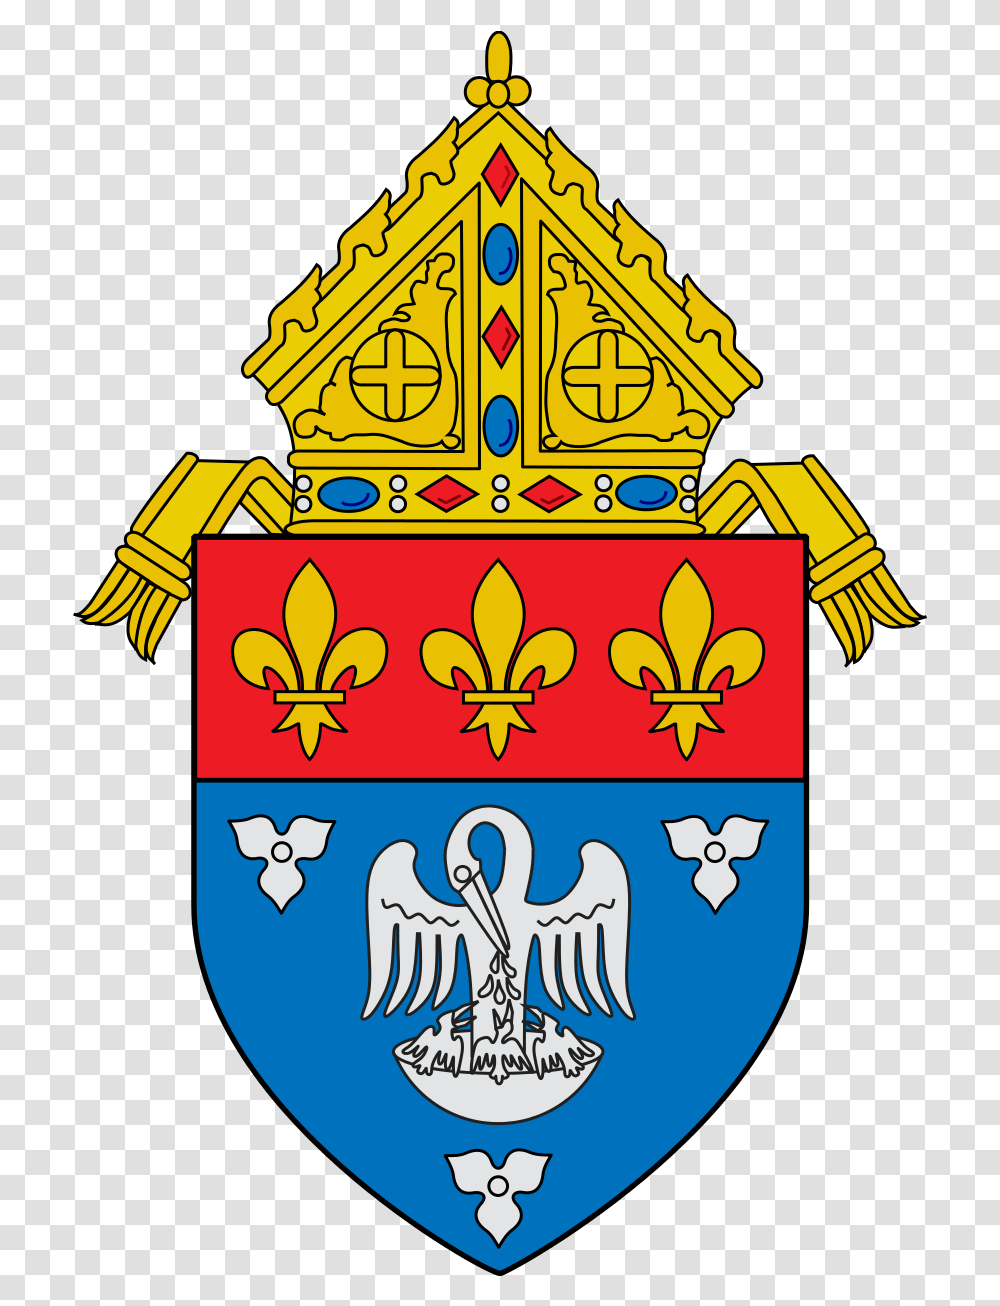 Archdiocese Of New Orleans Schools New Orleans Coat Of Arms, Armor, Symbol, Emblem, Logo Transparent Png